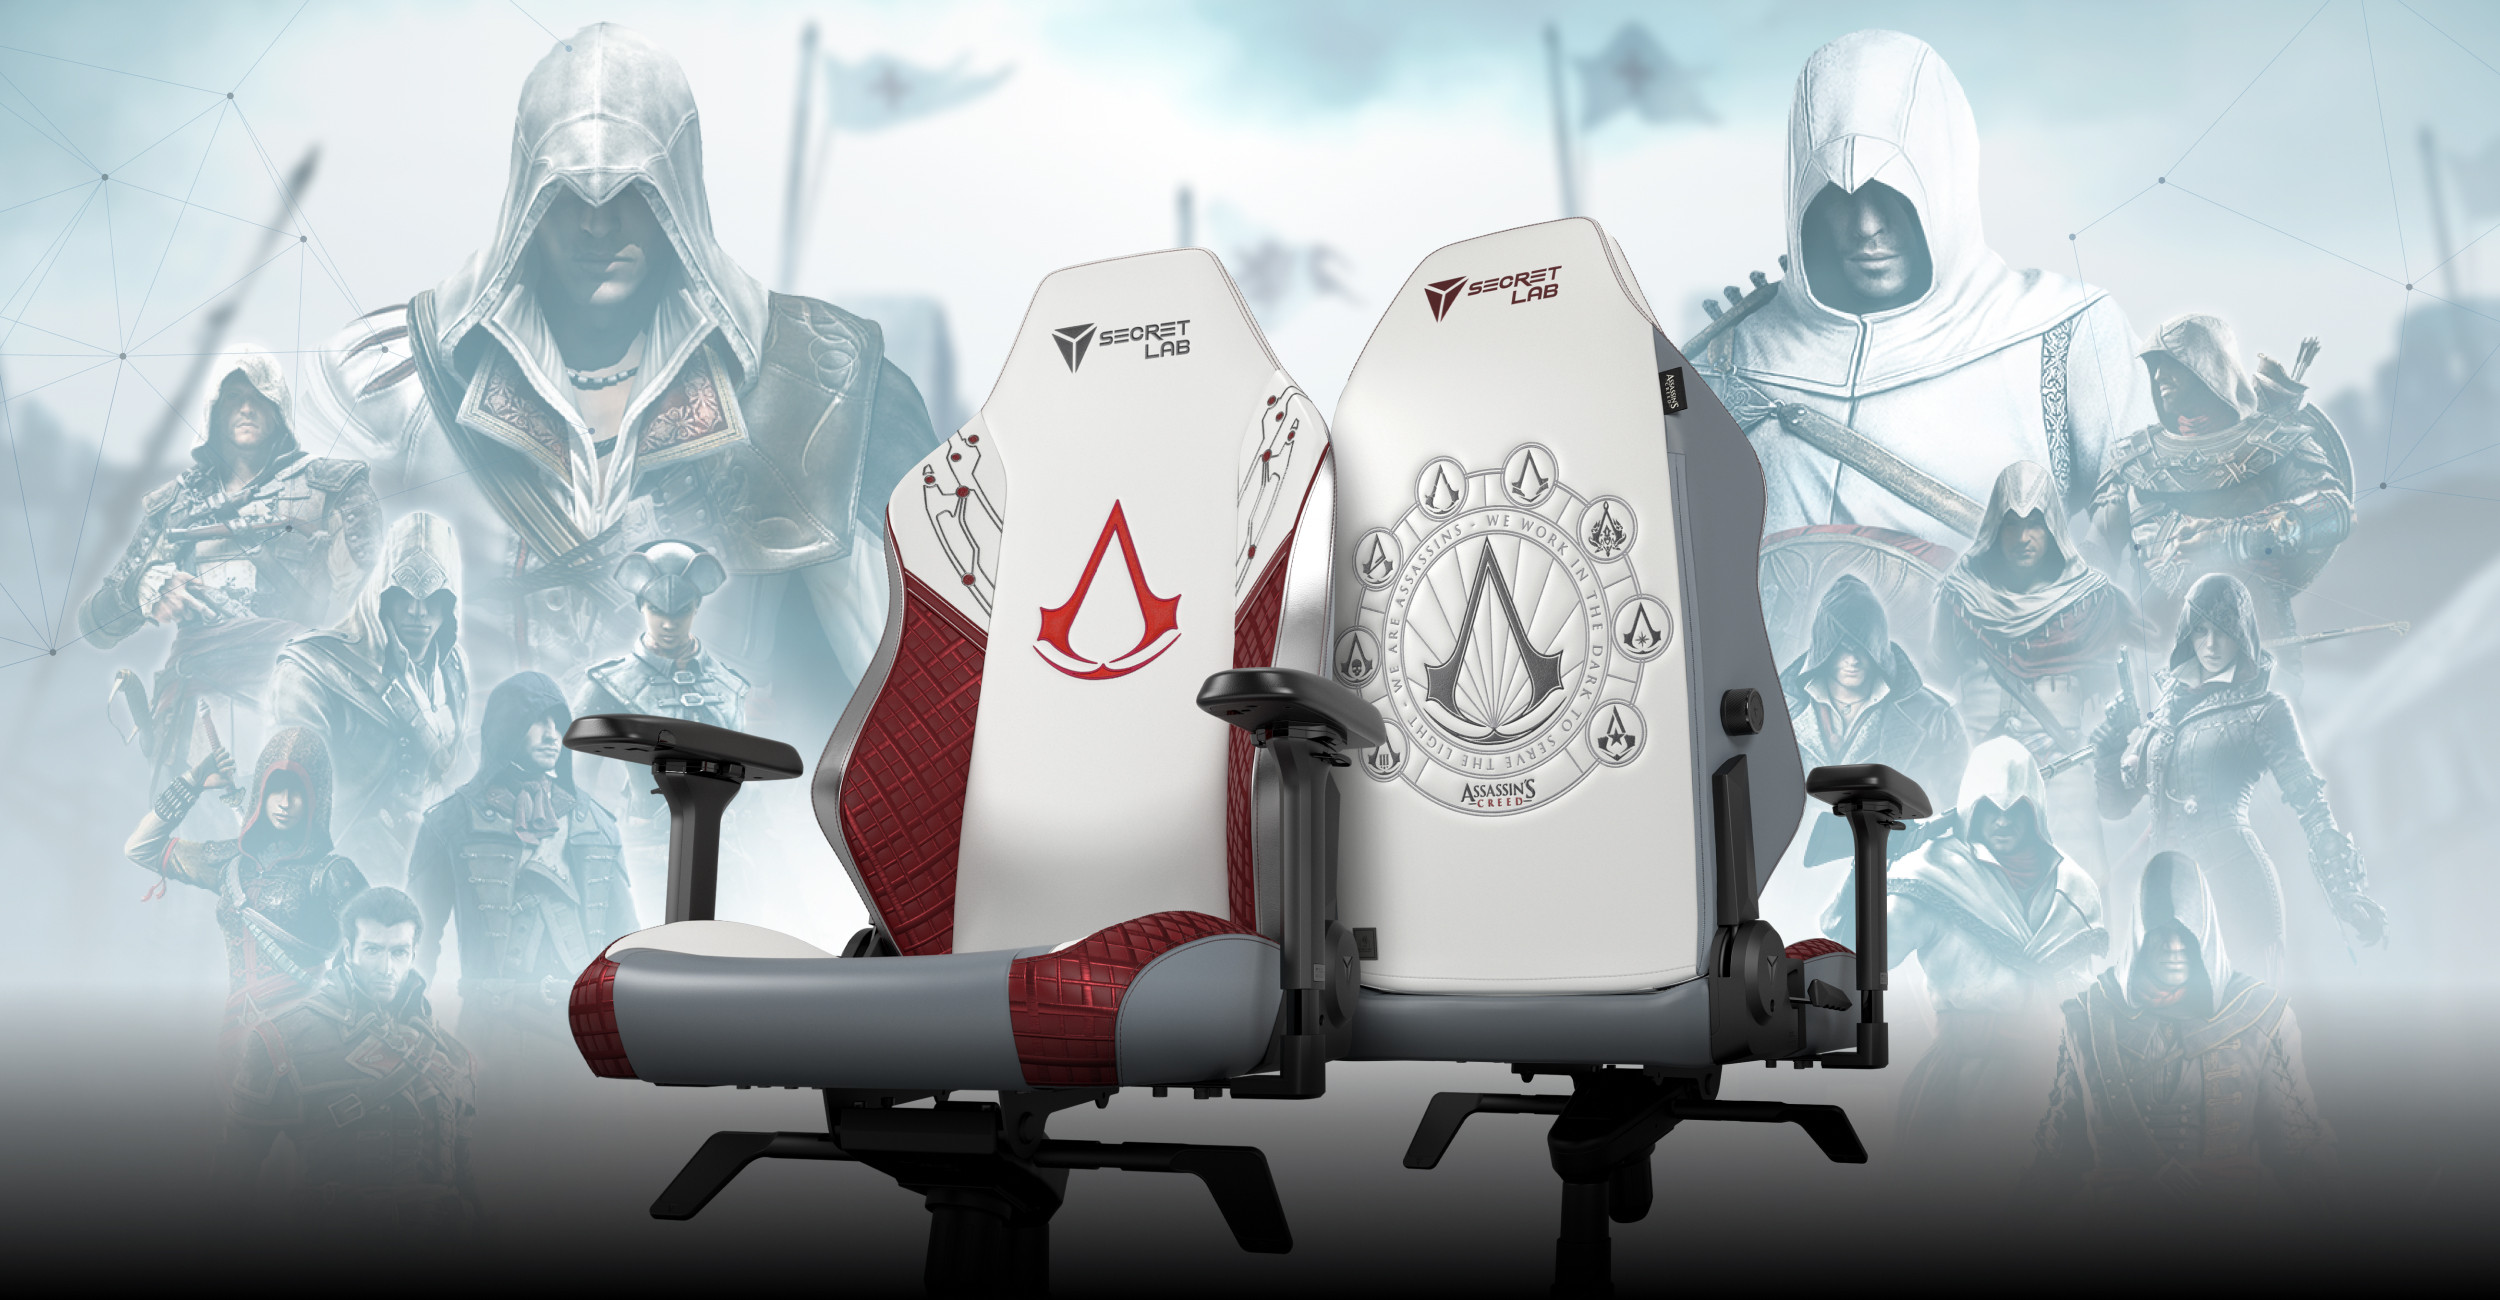 https://images.secretlab.co/theme/partnerships/assassins_creed/home-featured-AC-lg.jpg